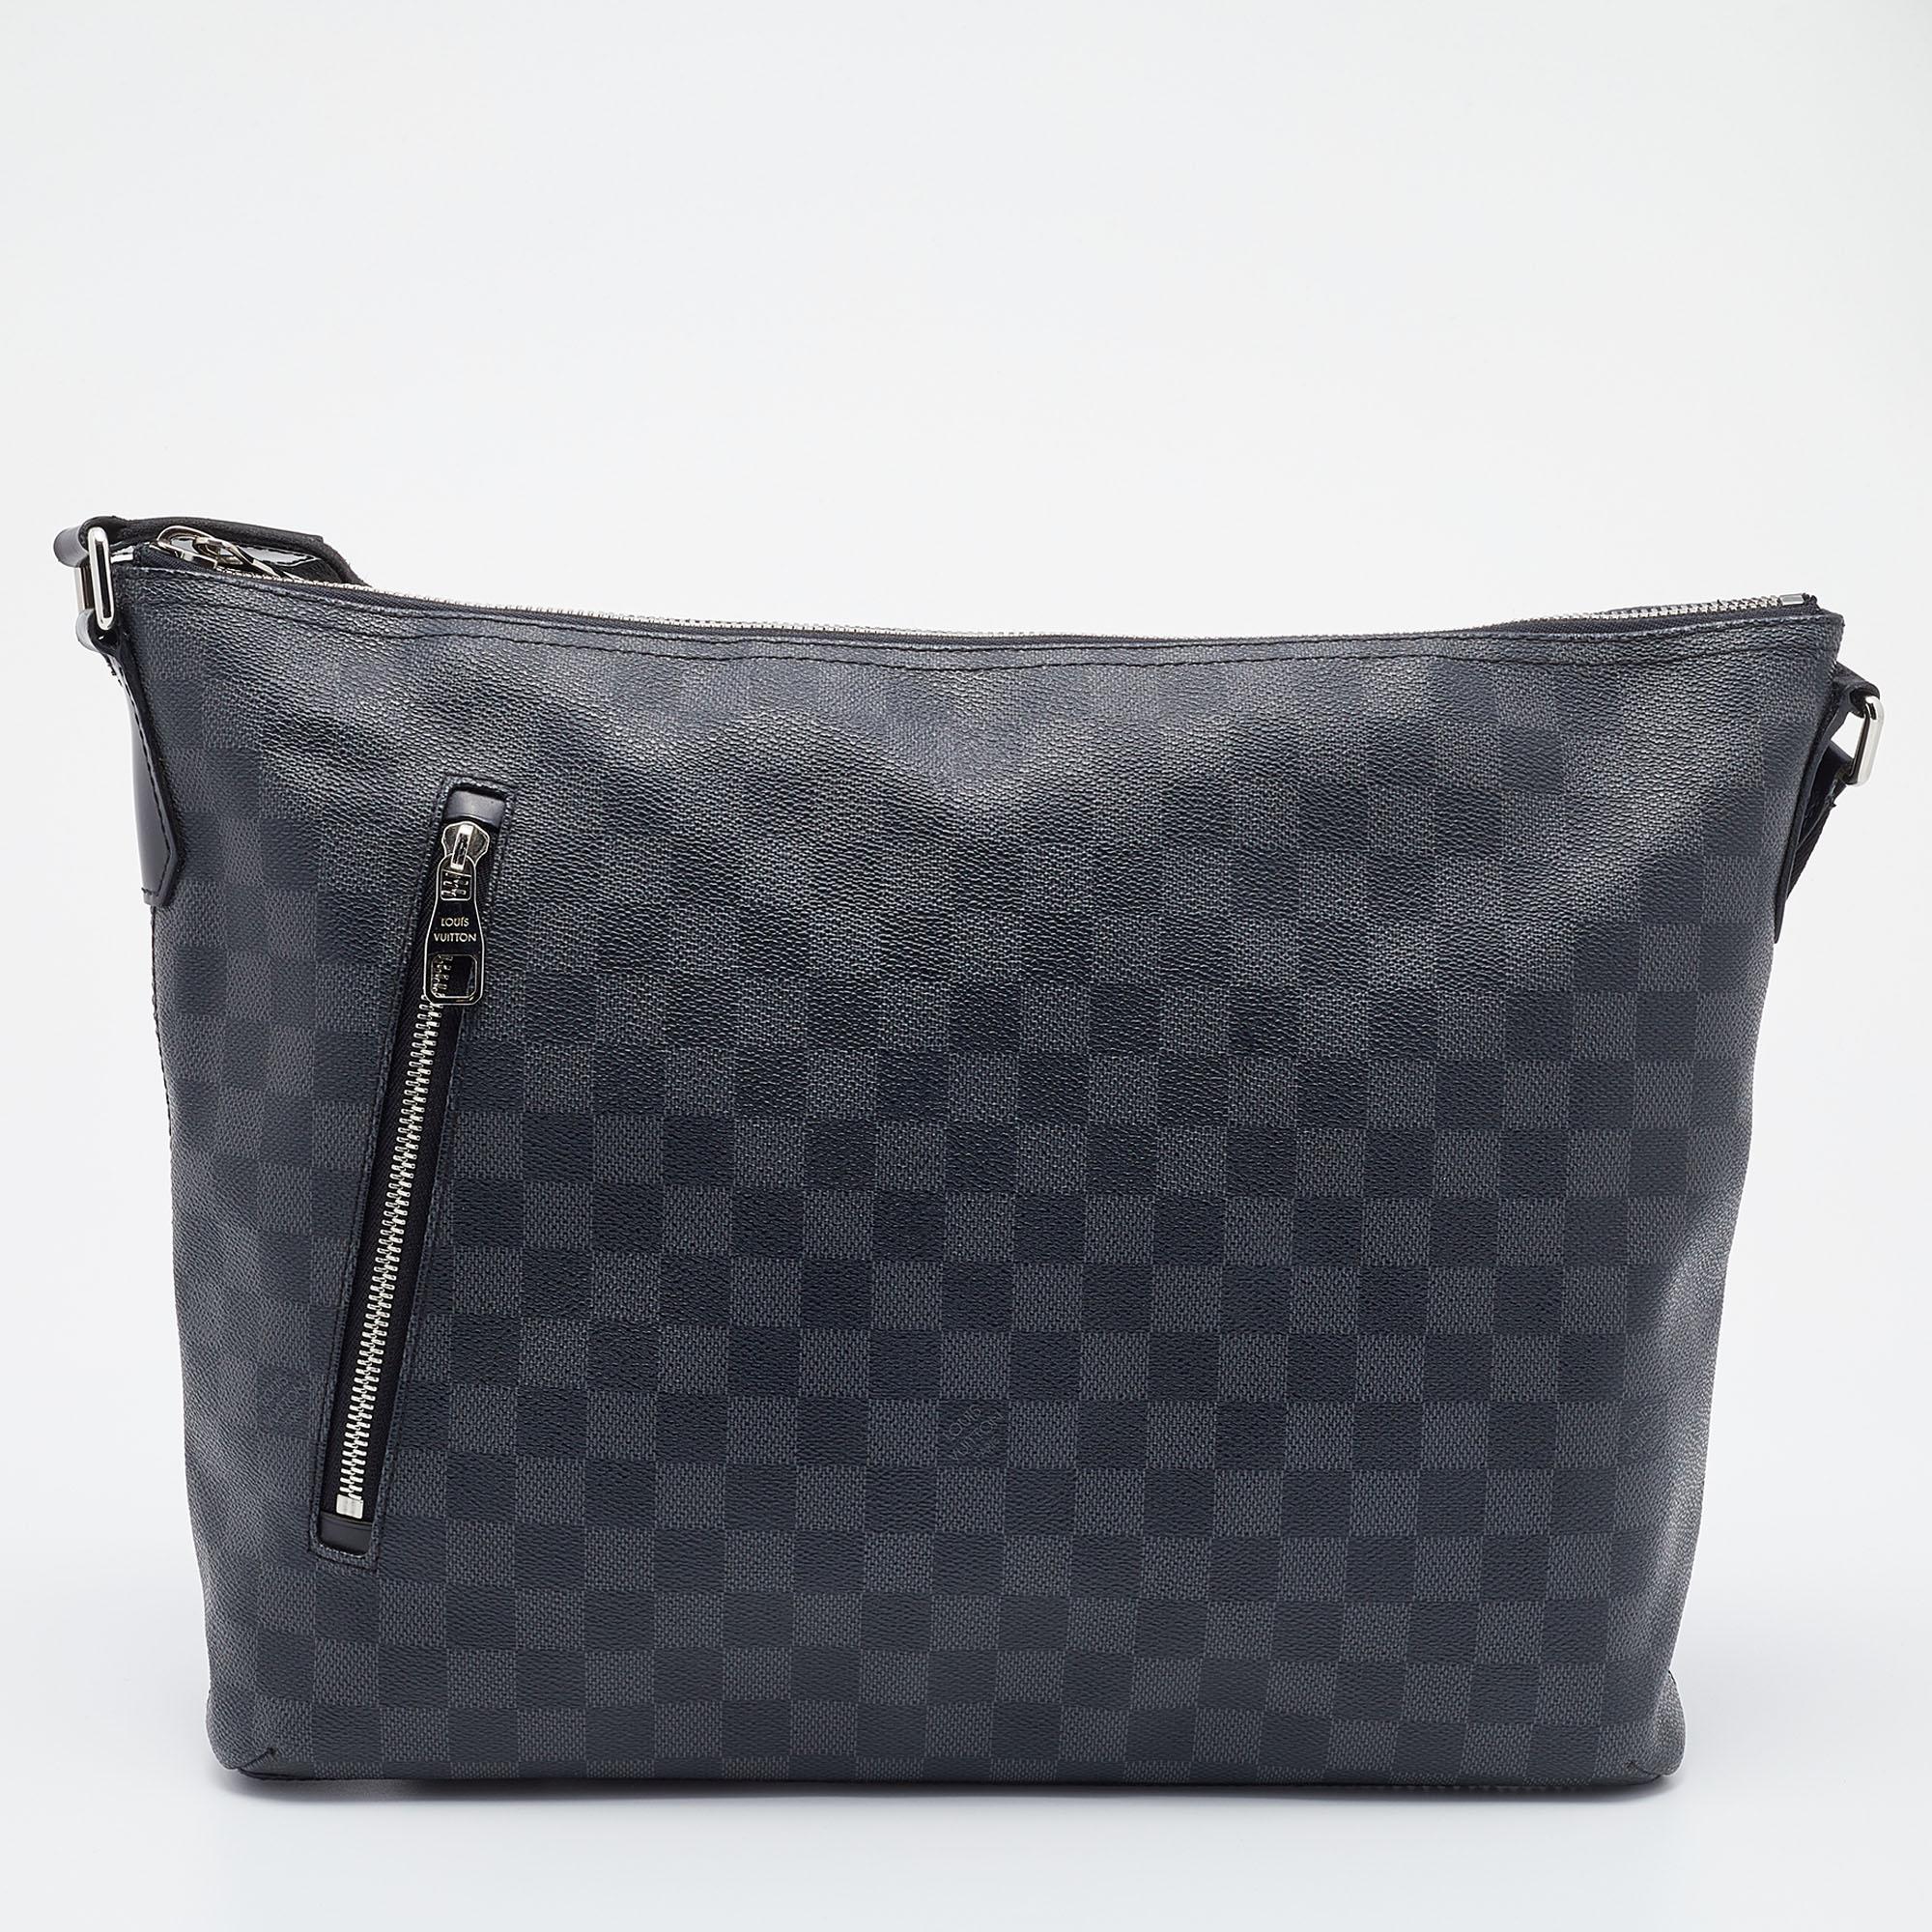 Filled with functional characteristics, this Louis Vuitton Mick GM bag is the epitome of sophistication and luxury. It can be carried around with a shoulder strap, and the silver-tone accents add to its charm. Crafted from Damier Graphite canvas,